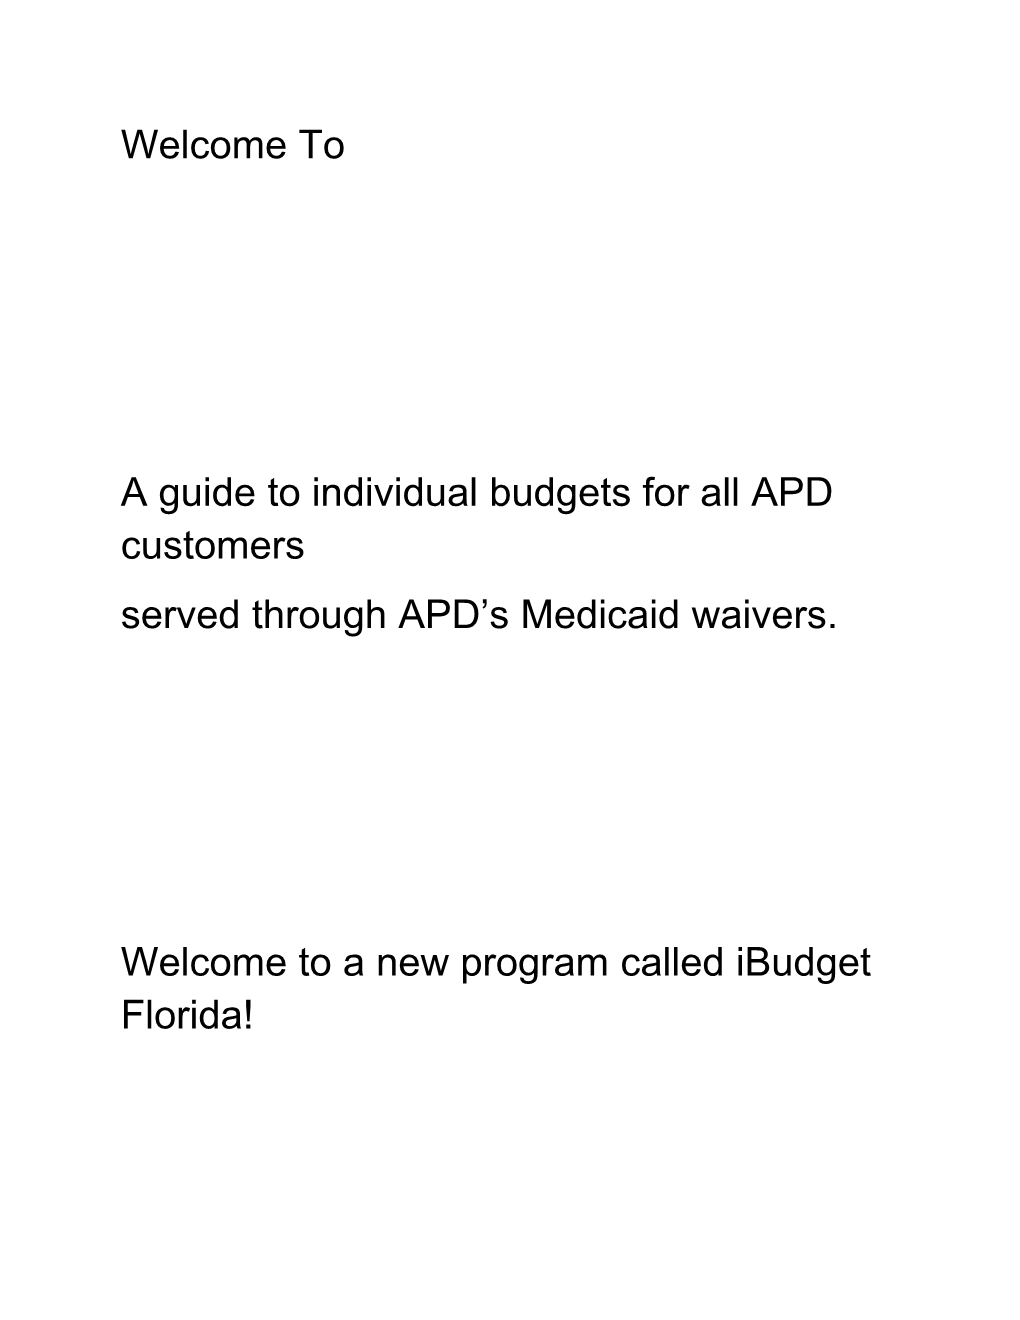 A Guide to Individual Budgets for All APD Customers